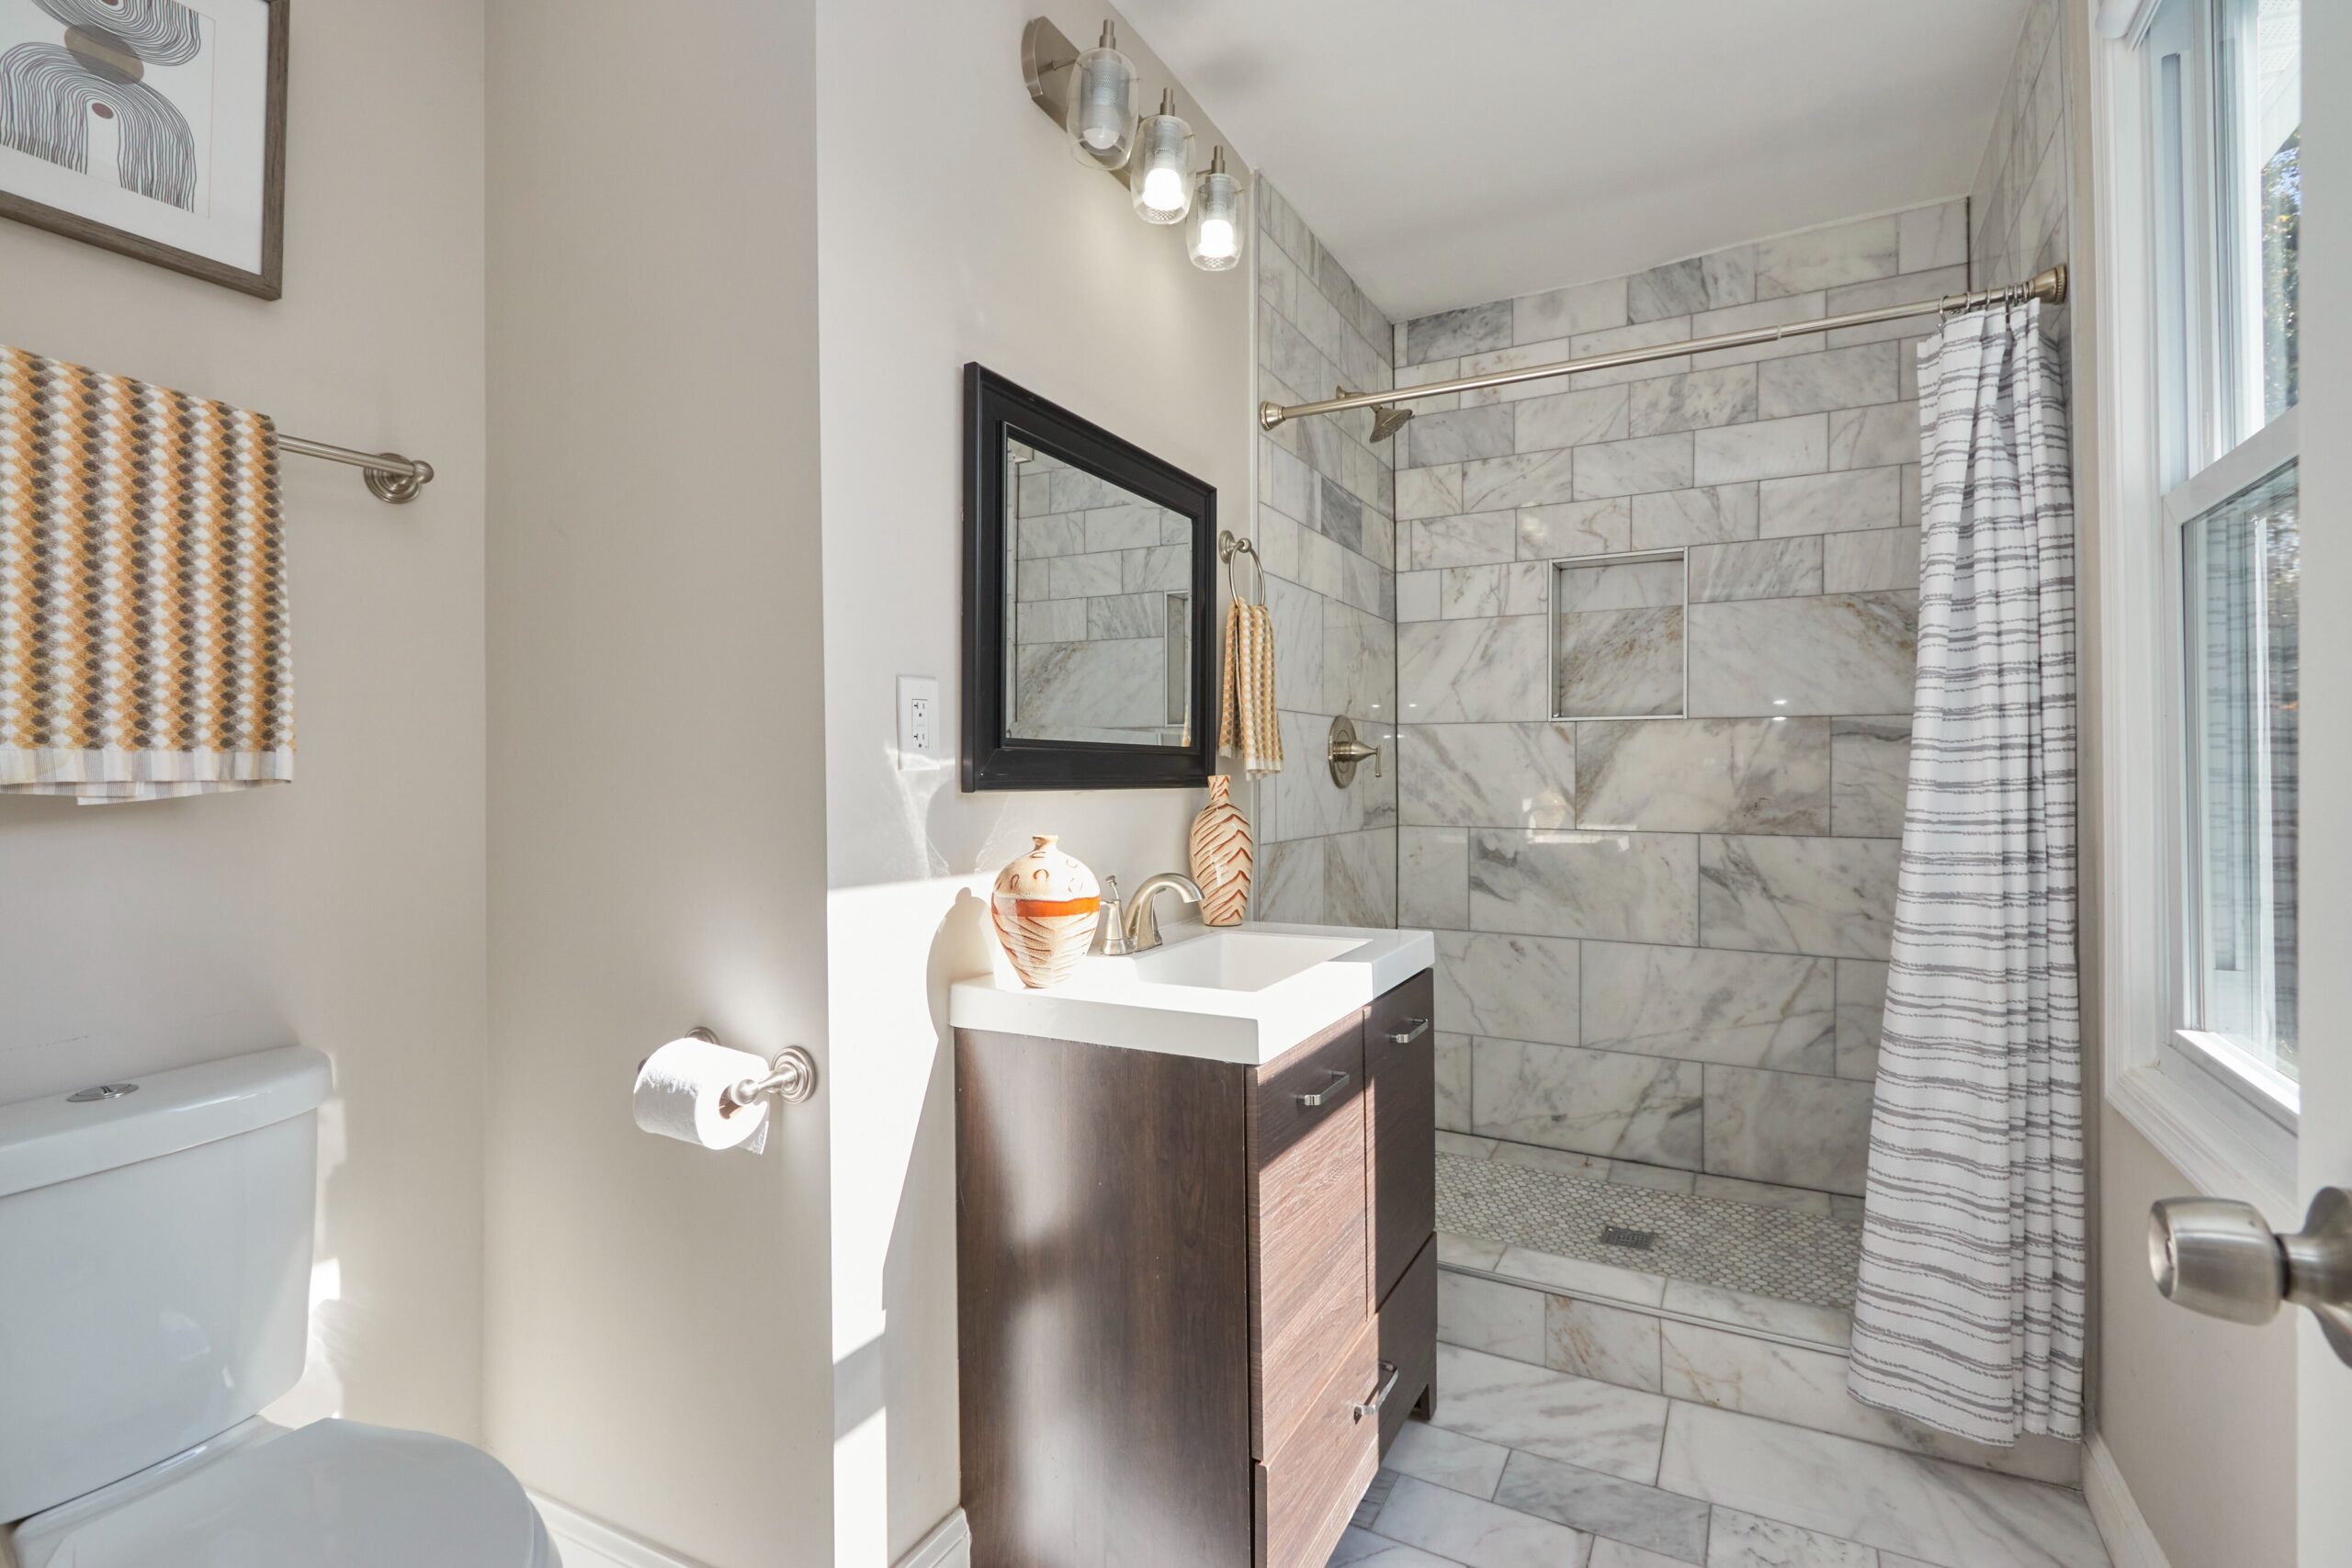 Professional interior photo of 1219 50th St NE in Washington, DC - showing one of the 2 full bathrooms with an updated tiled shower with recessed soap holder